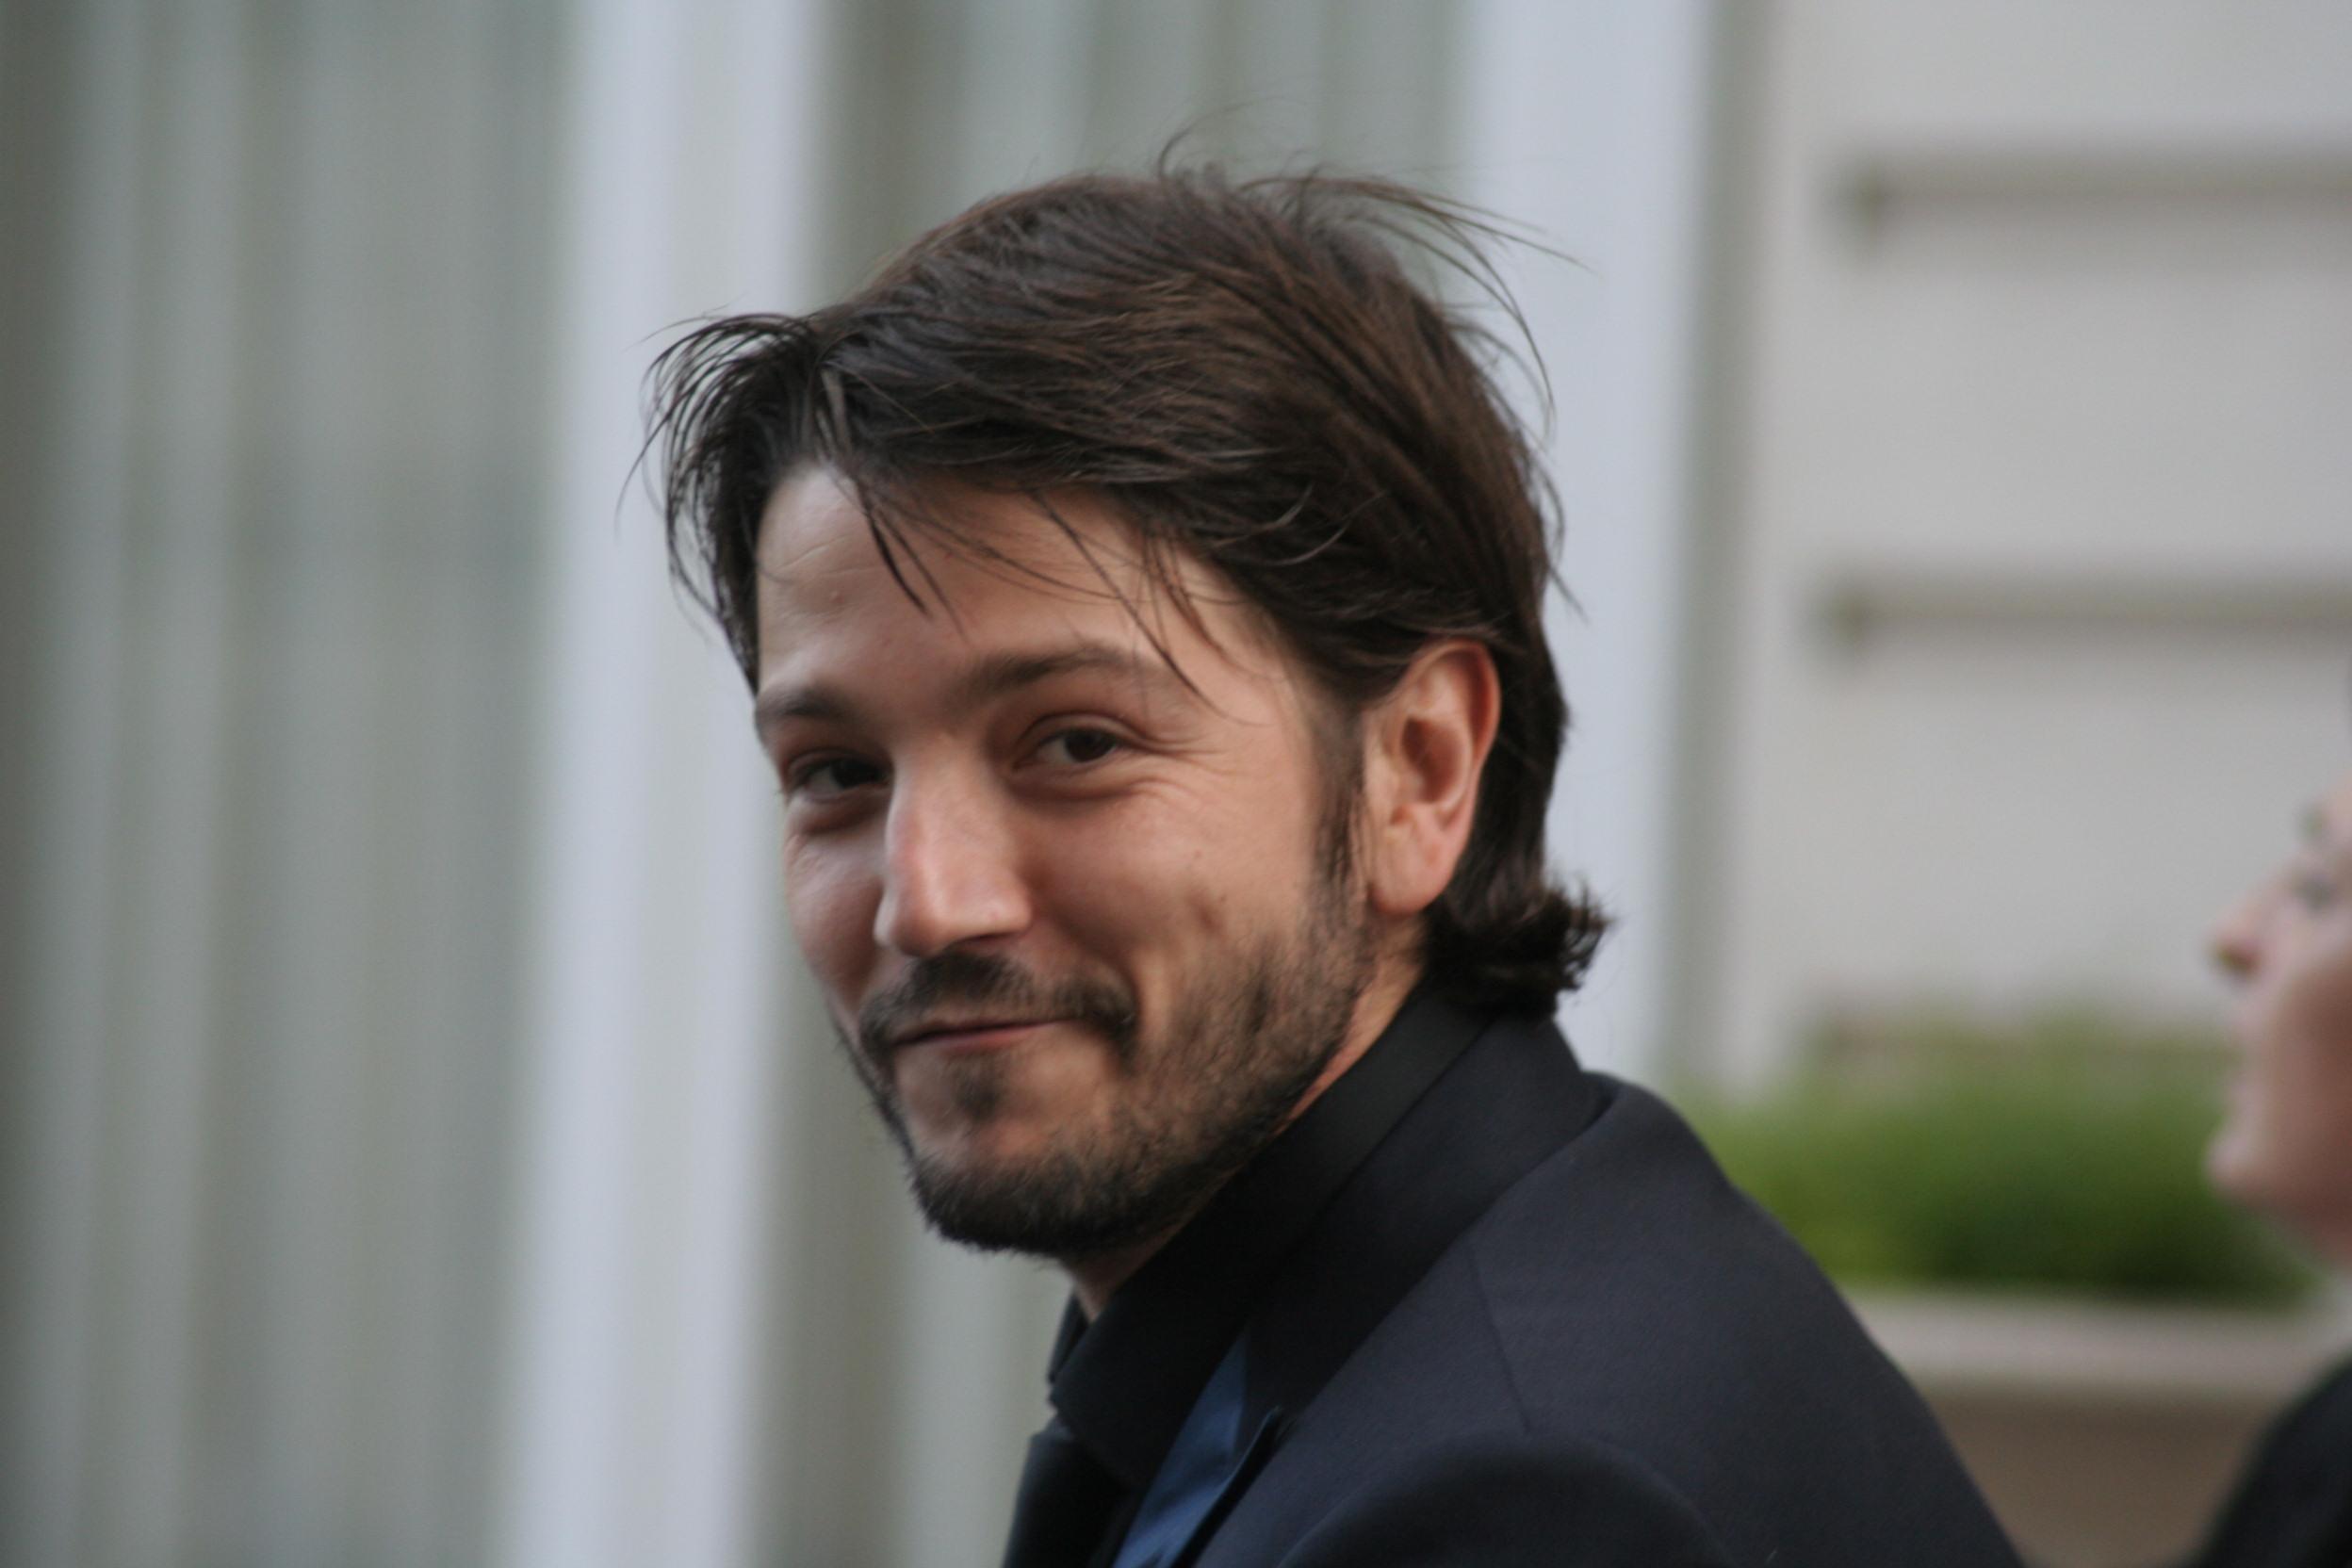 Download Diego Luna Celebrity Wallpapers Pictures 57621 2496x1664 px